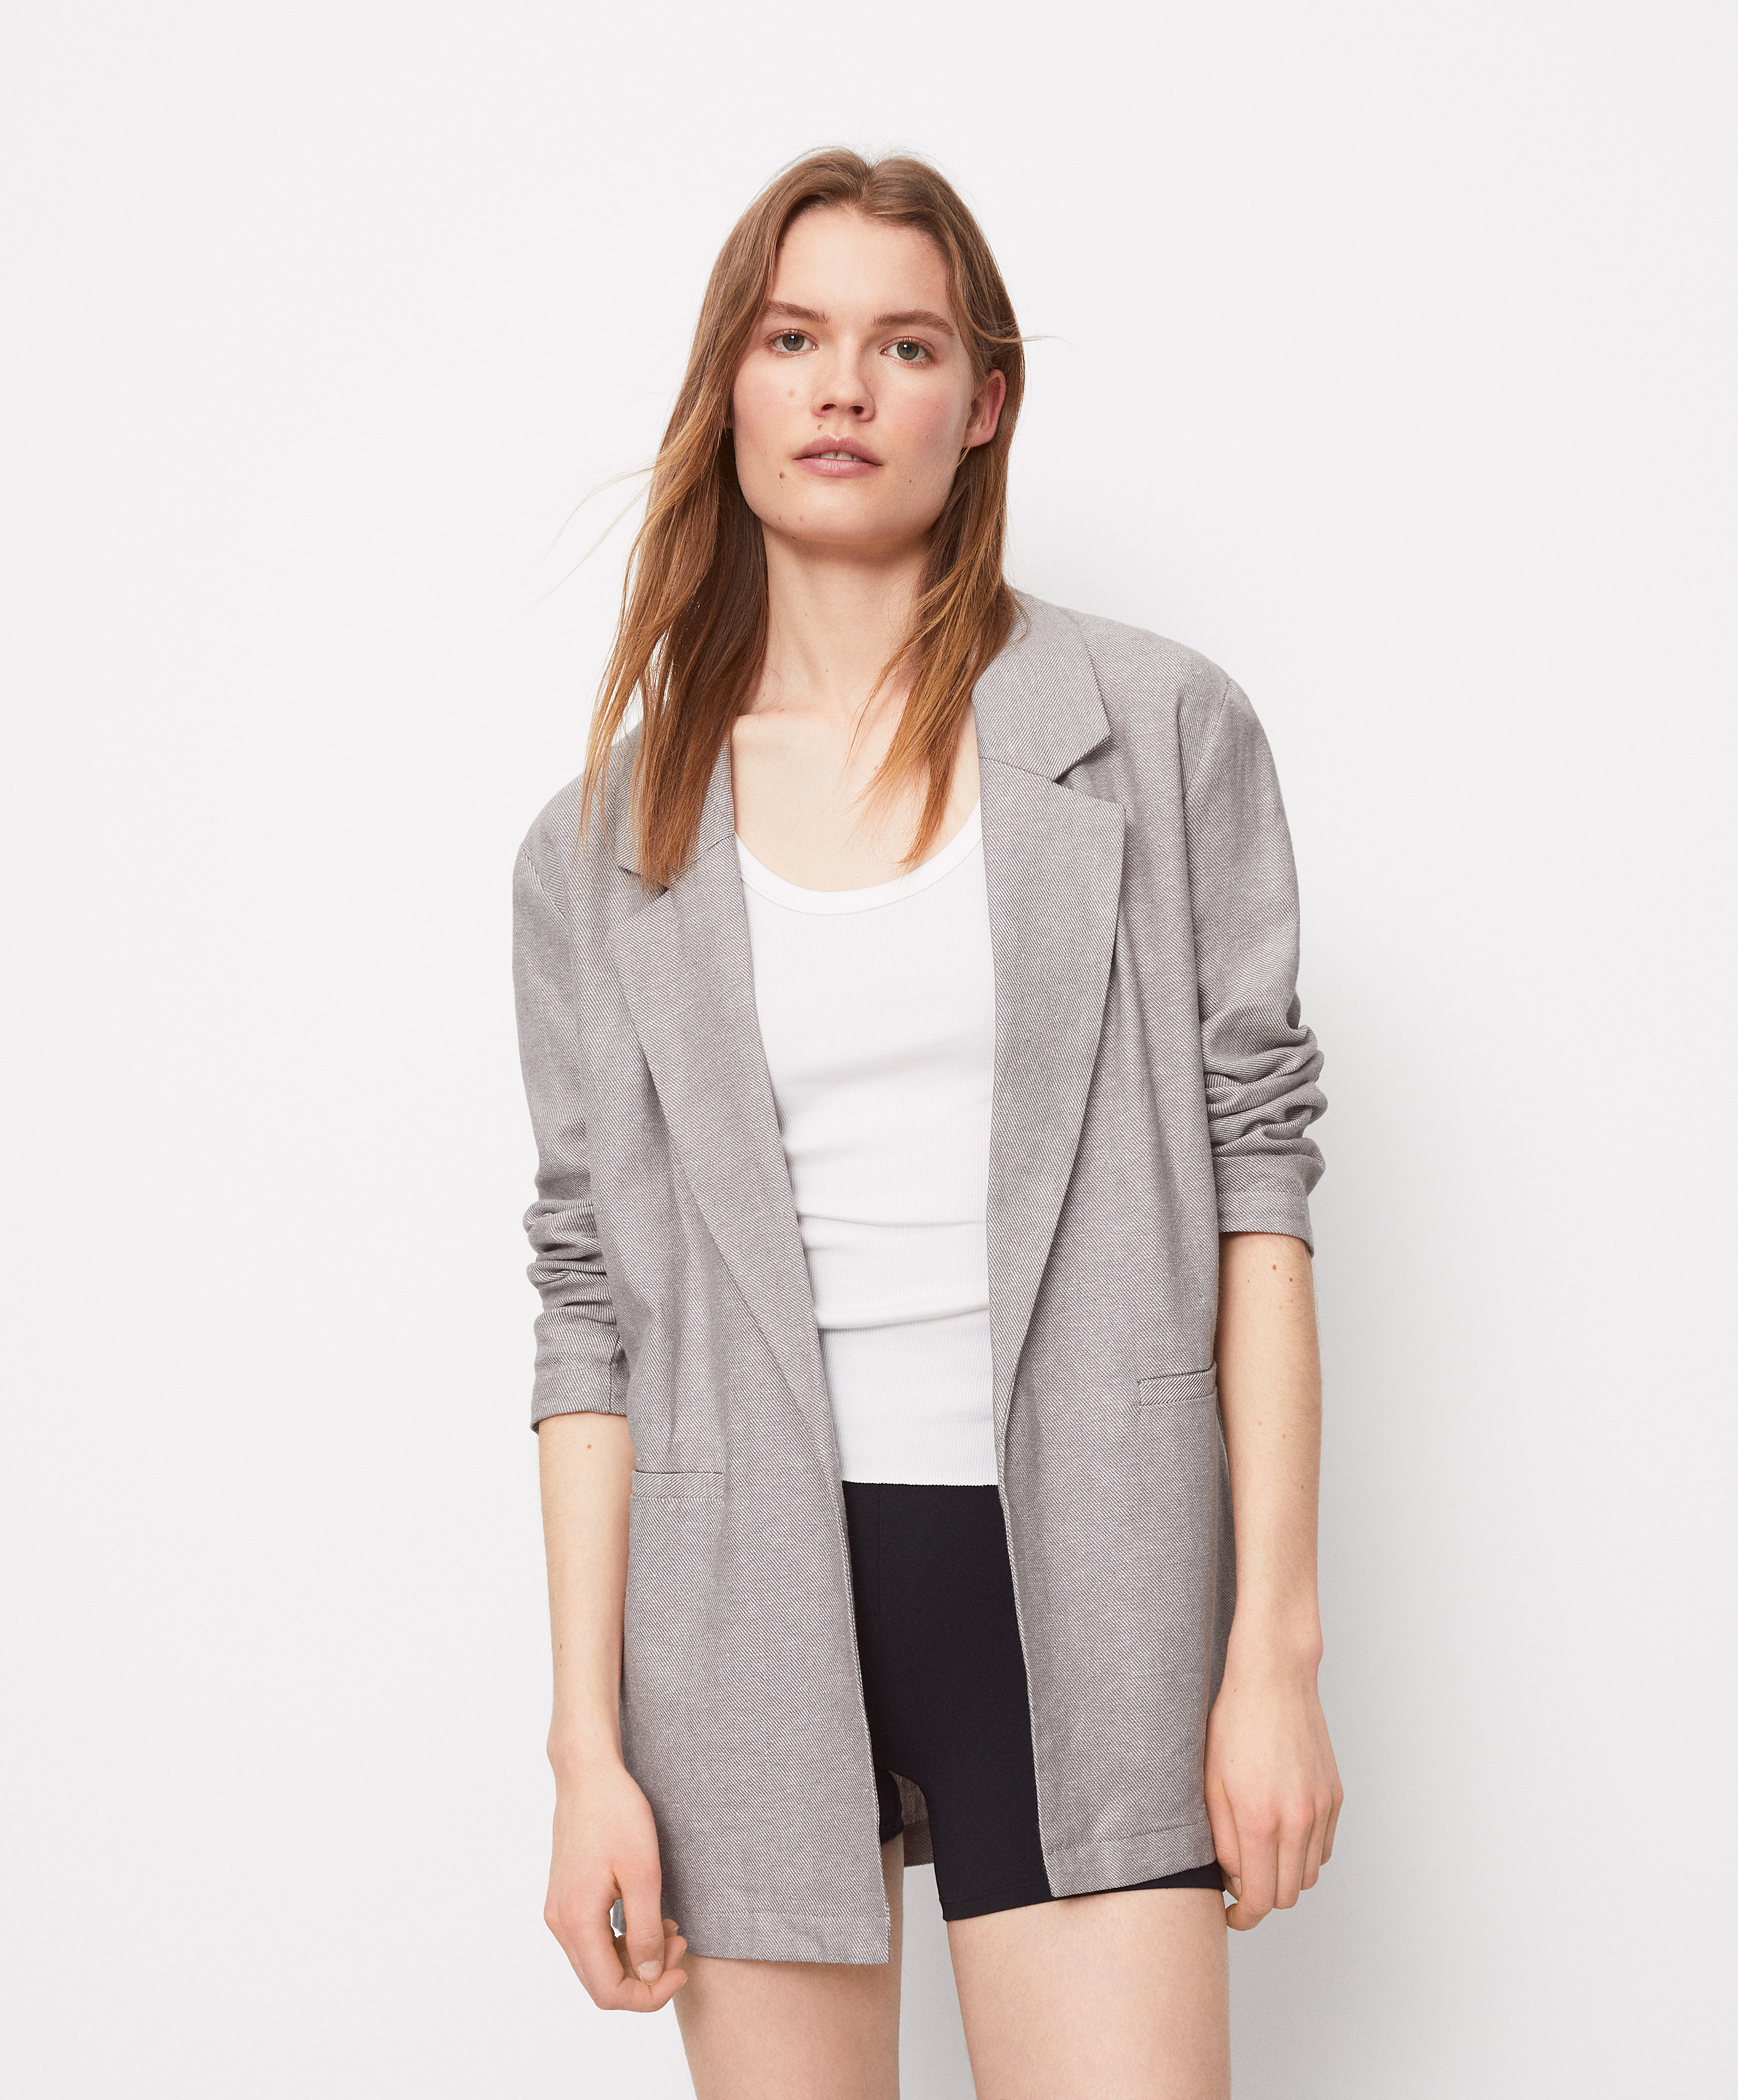 Linen and cotton jacket